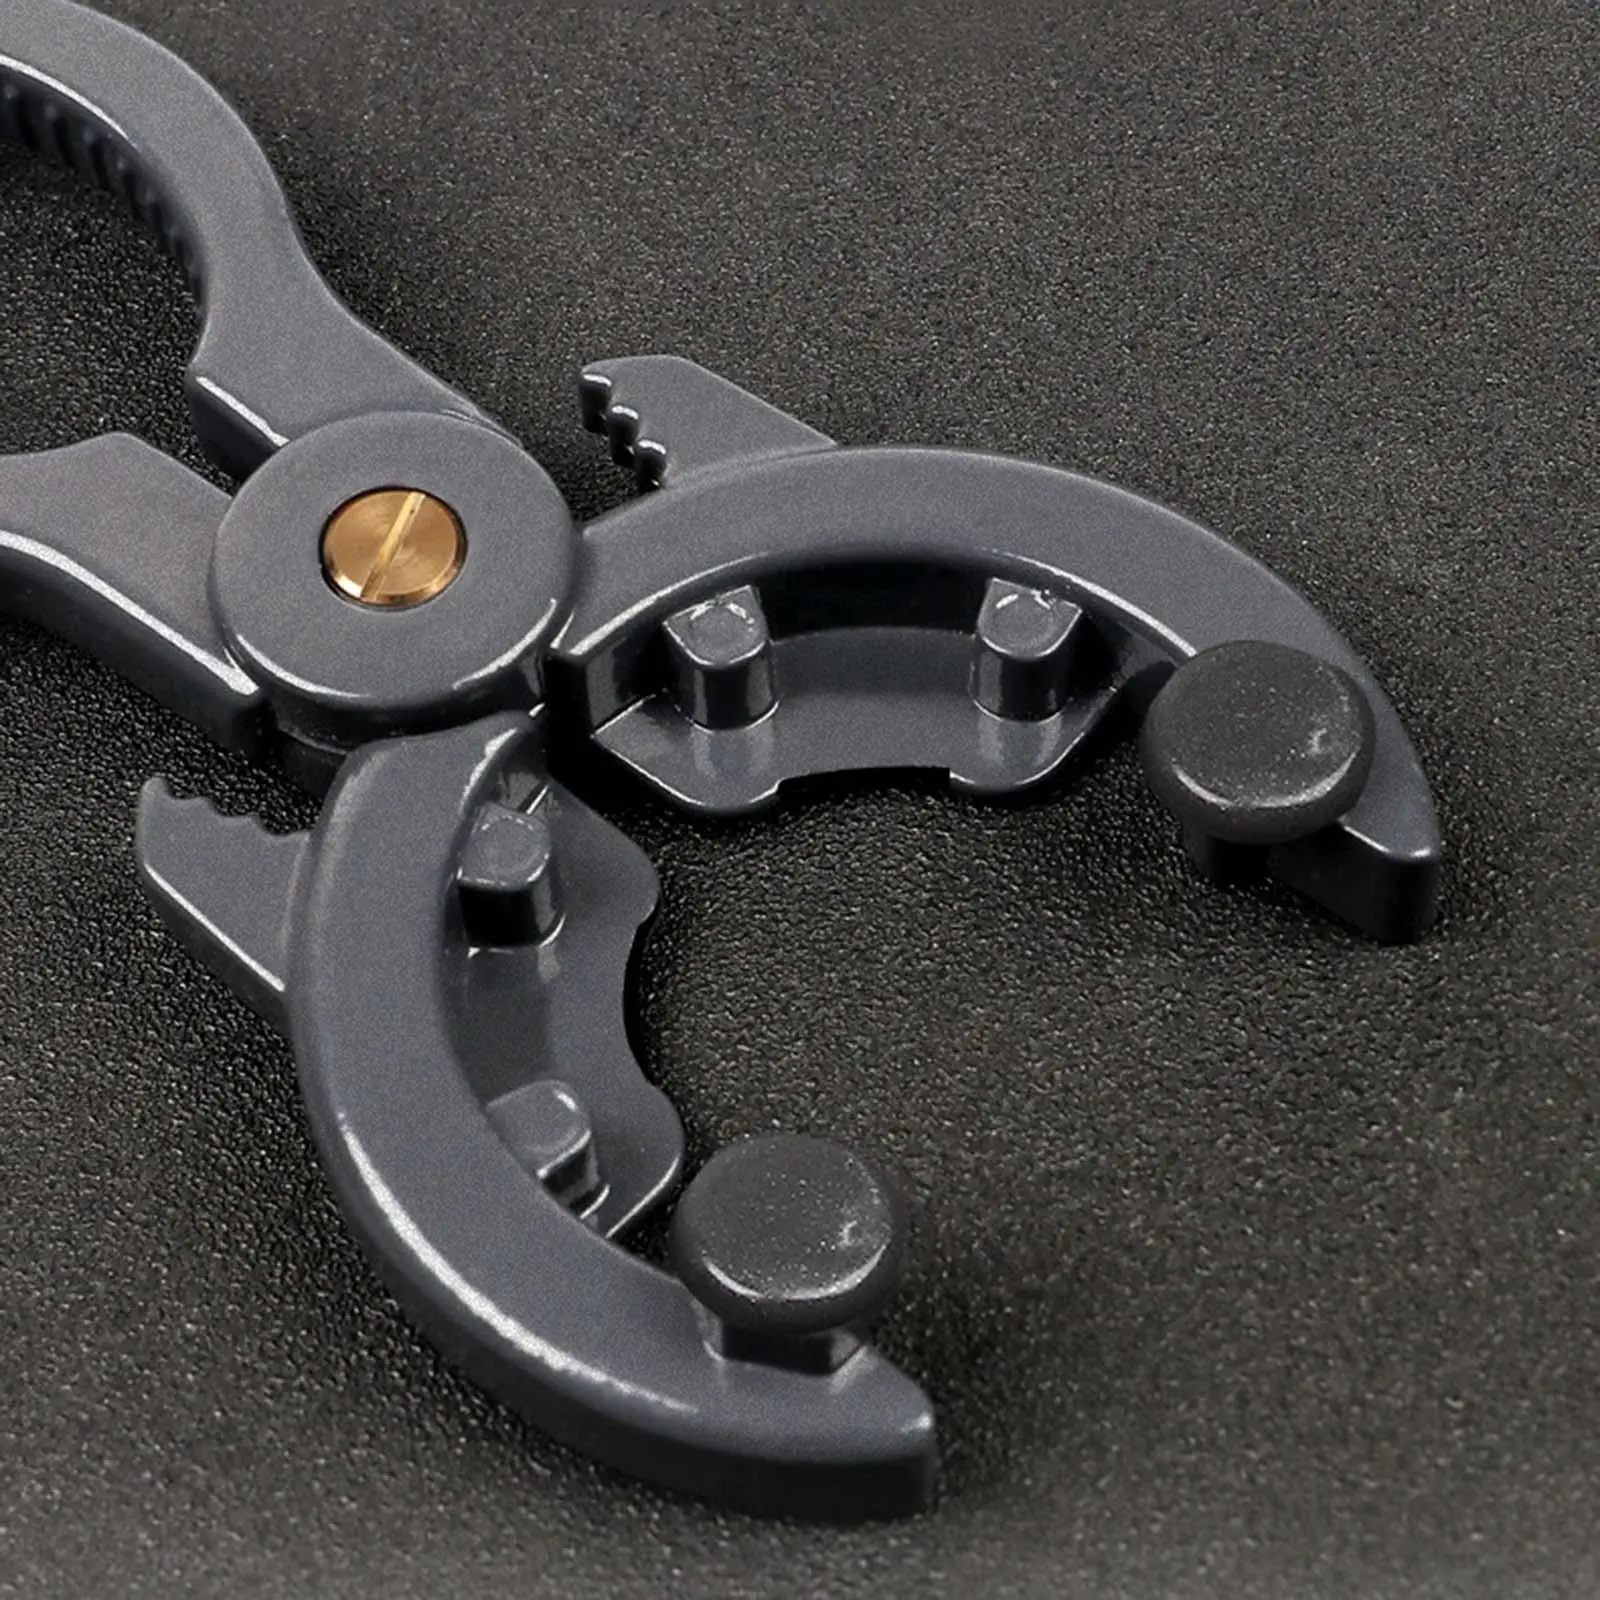 Gas Tank Pressure Reducing Valve Wrench Liquefied Gas Professional Hand Tools Repair Tool Can Opener Walnut Opener Bottle Opener